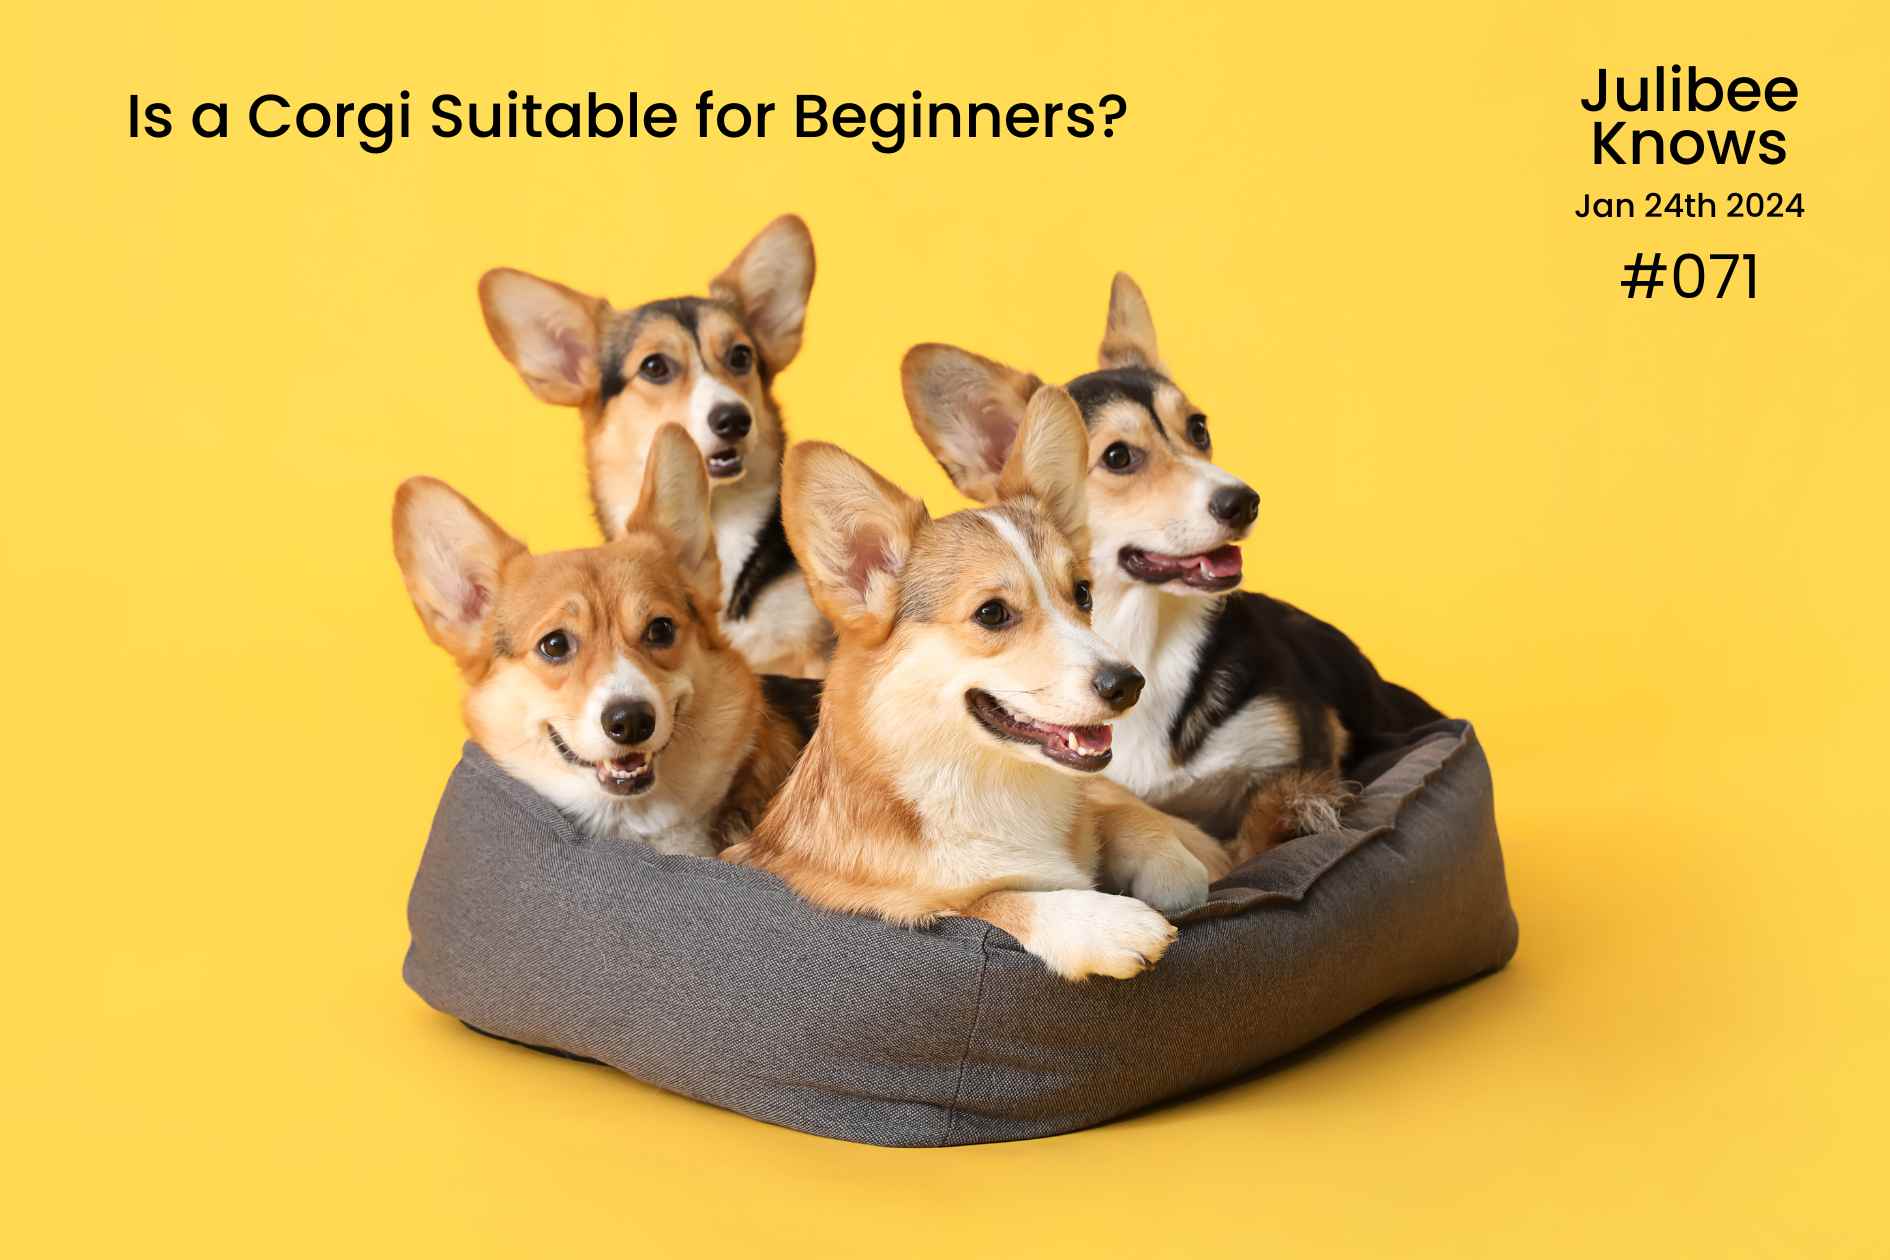 Is a Corgi Suitable for Beginners